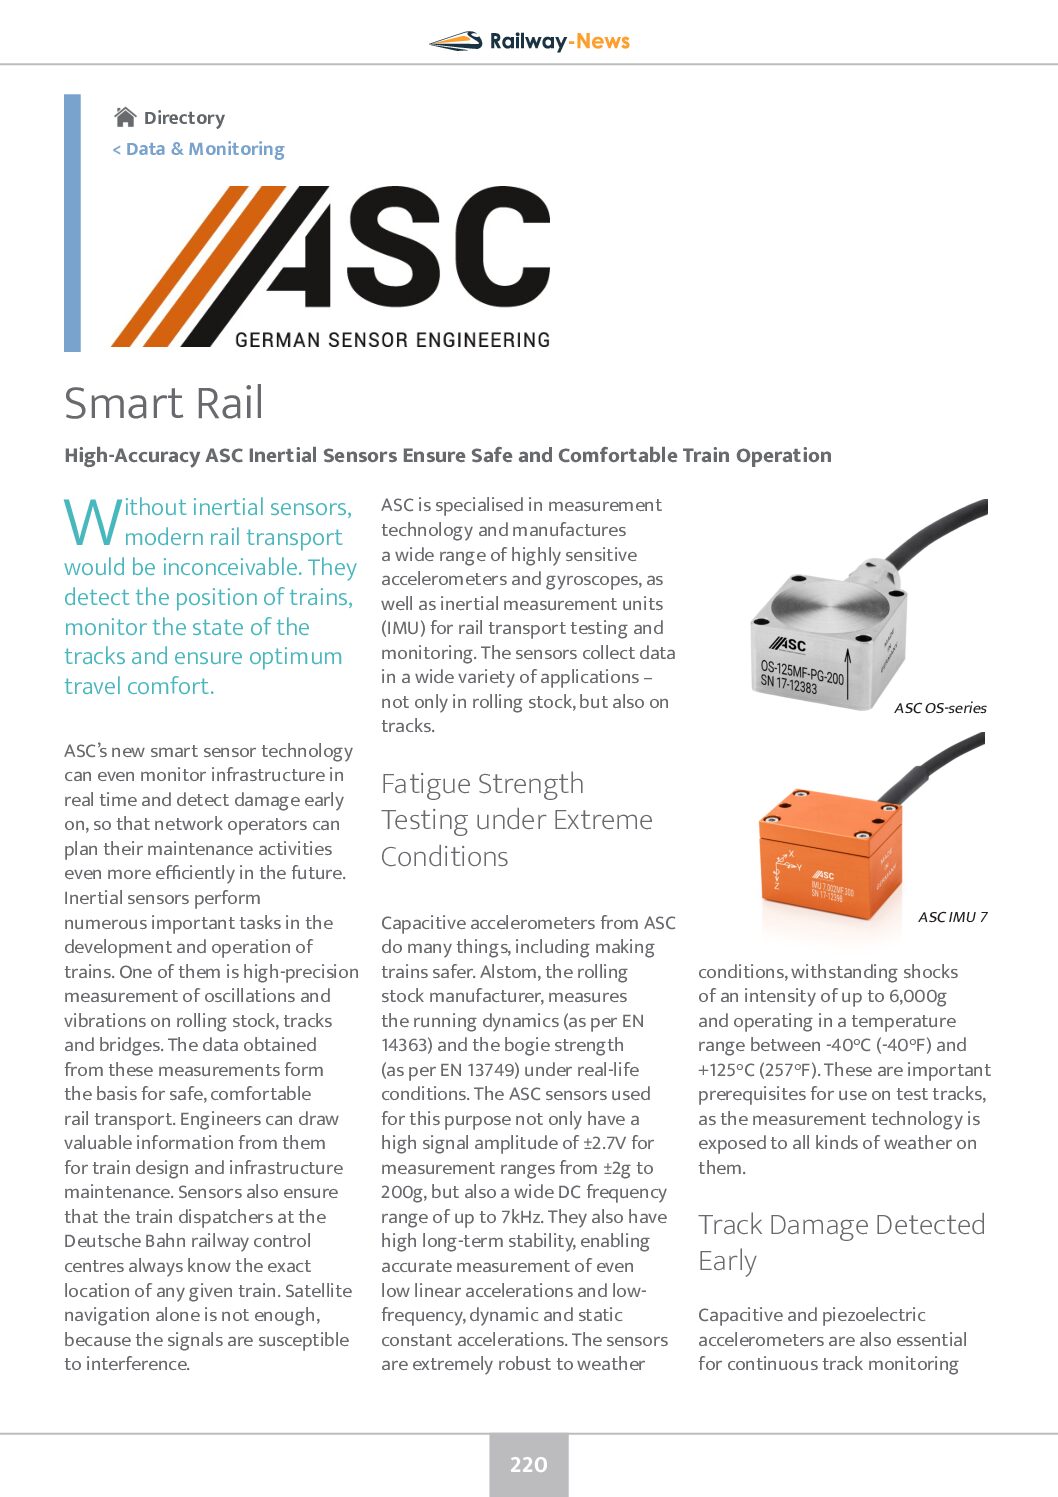 High-Accuracy ASC Inertial Sensors Ensure Safe and Comfortable Train Operation